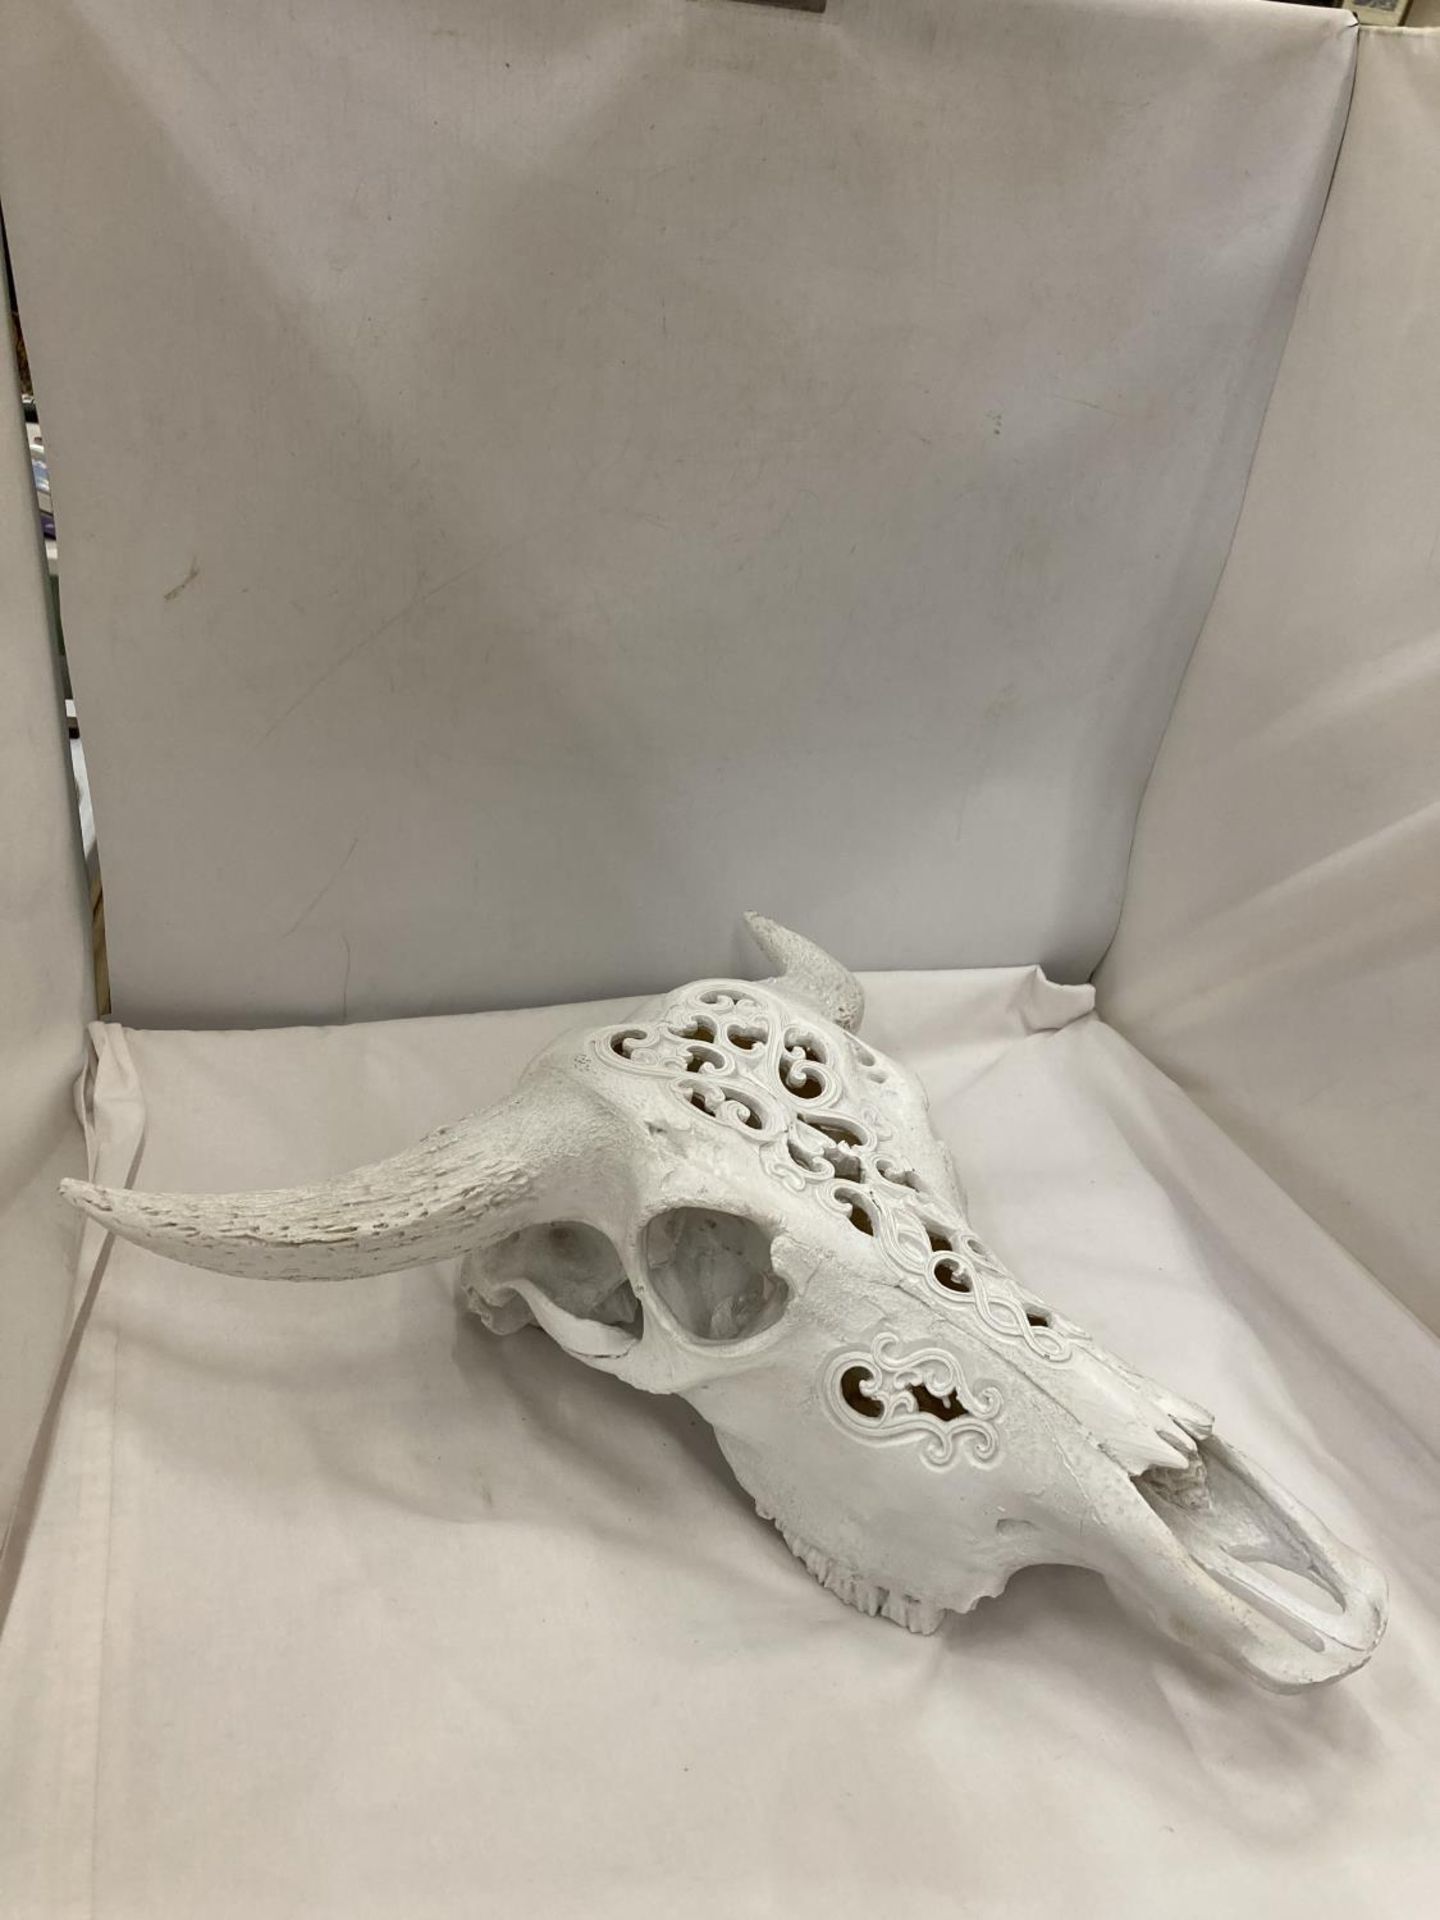 A MODEL OF A WHITE COW SKULL WITH HORNS - Image 2 of 4